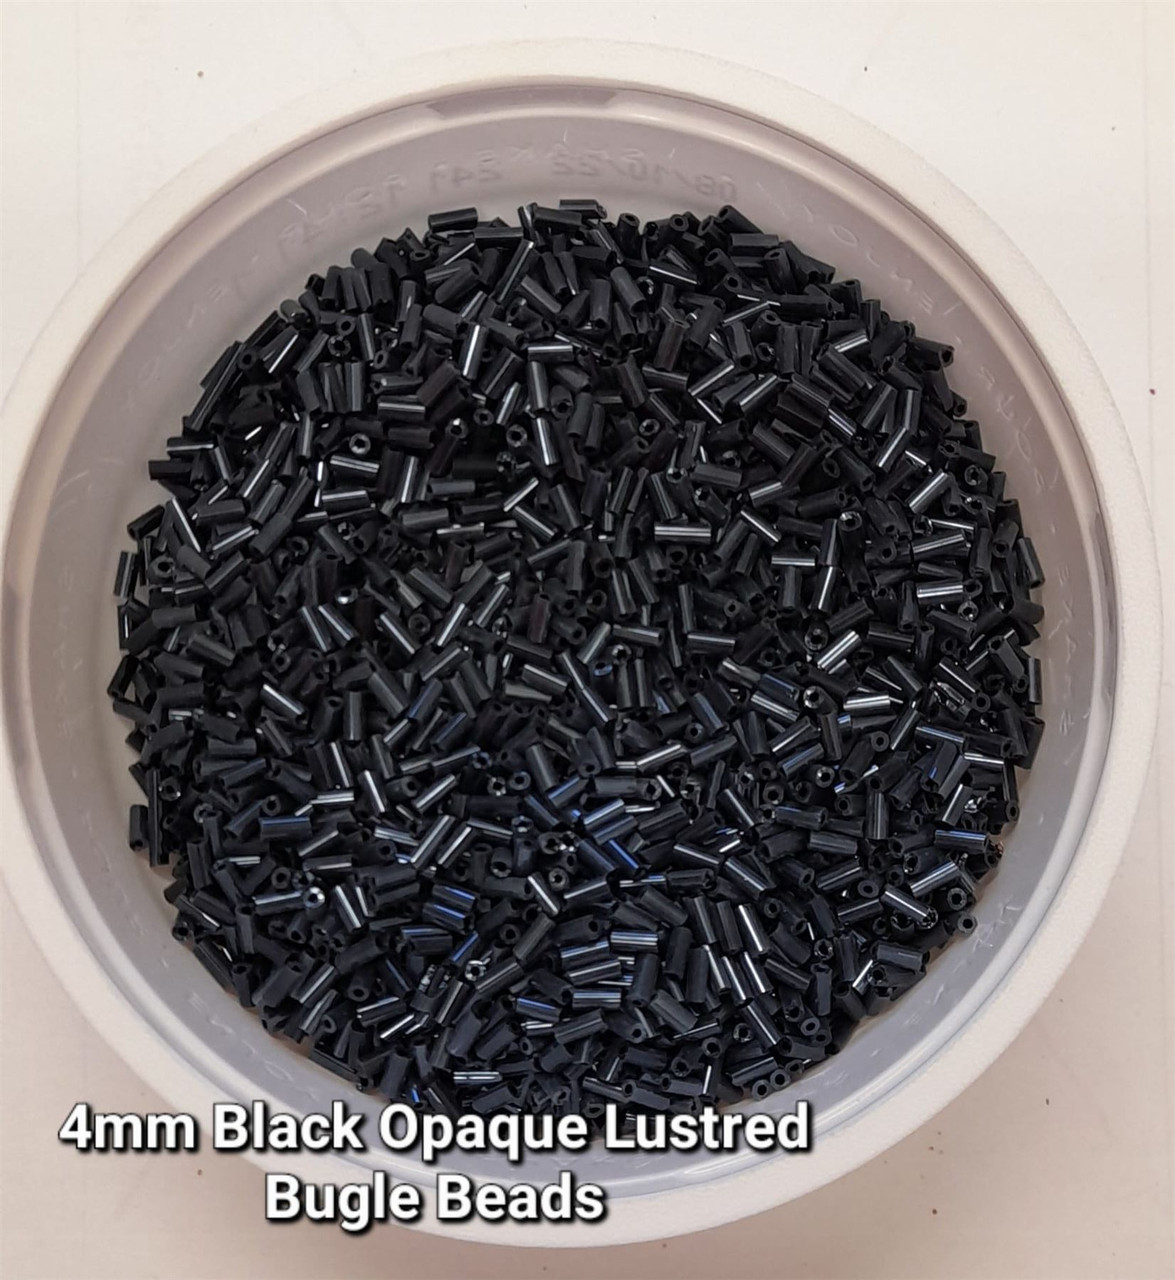 50g glass bugle beads - Black Opaque Lustred - approx 4mm